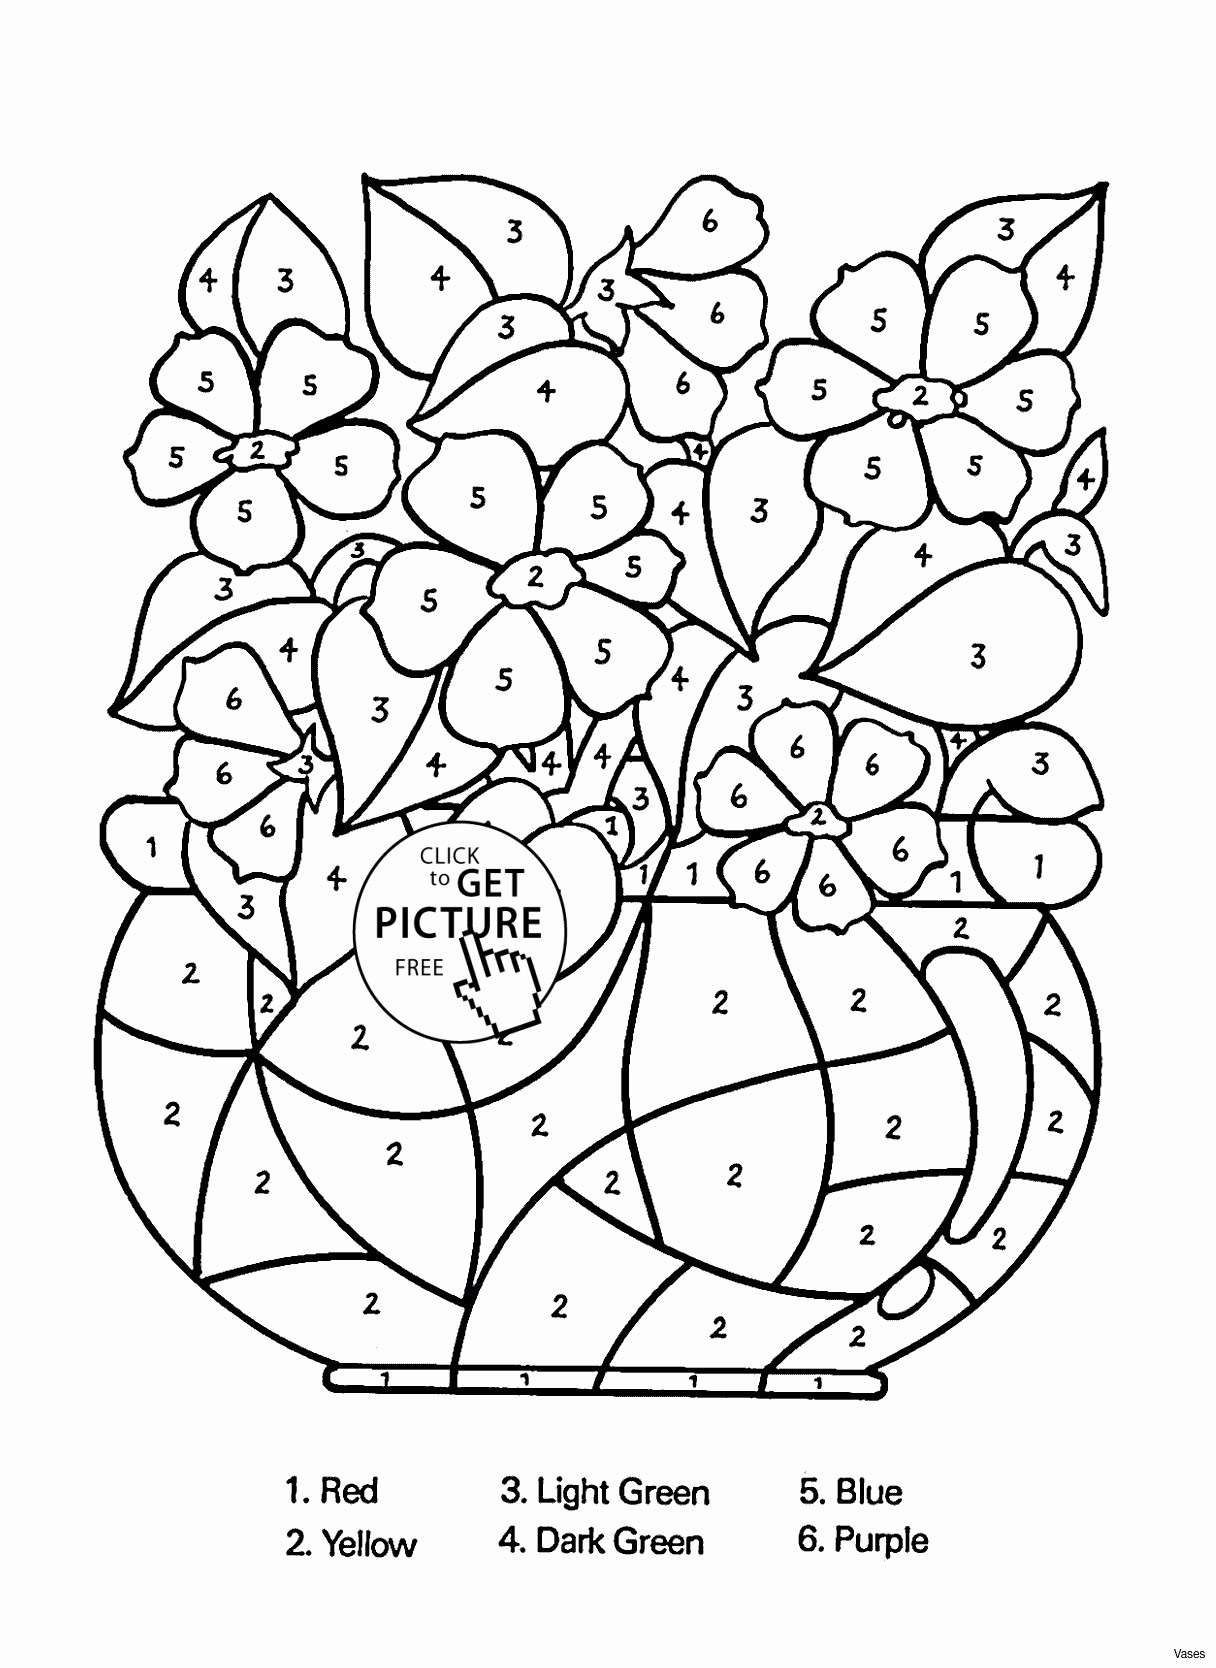 glass flowers and vase of white glass vase elegant vases flower vase coloring page pages in white glass vase elegant vases flower vase coloring page pages flowers in a top i 0d